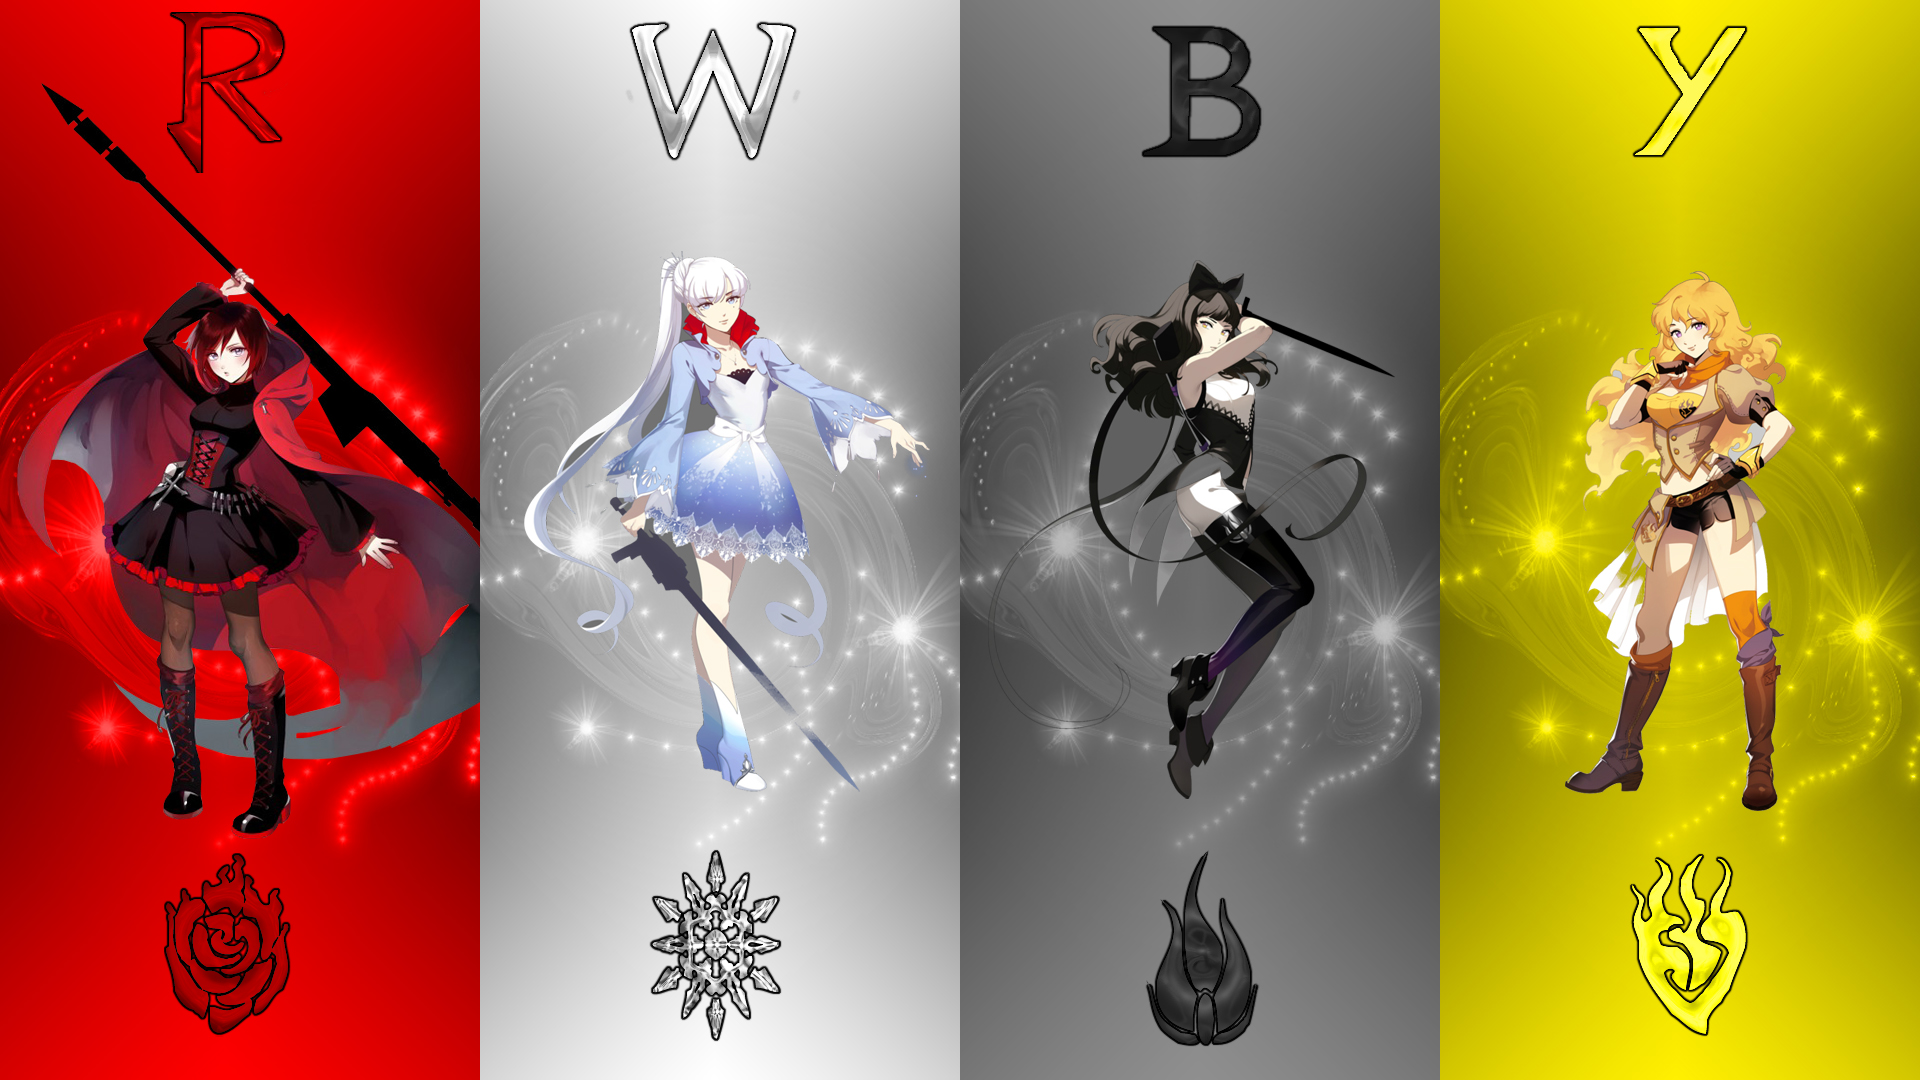 RWBY, Ruby Rose, Yang Xiao Long, Weiss Schnee, Red, Yellow, Black, White, Ice Wallpaper